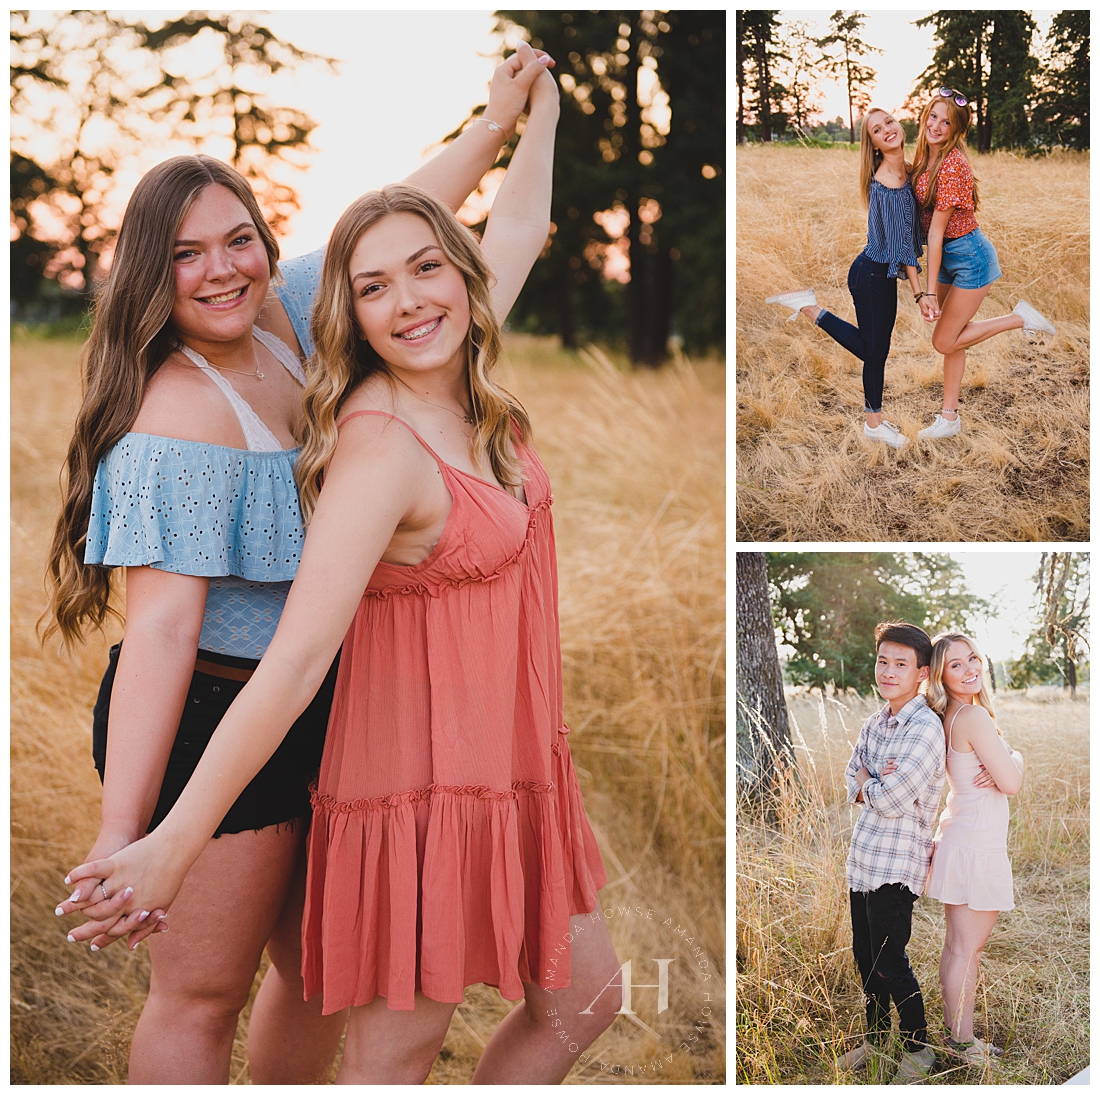 Head to the Blog to see more from this fun BFF Portrait Session! | Photographed by Amanda Howse